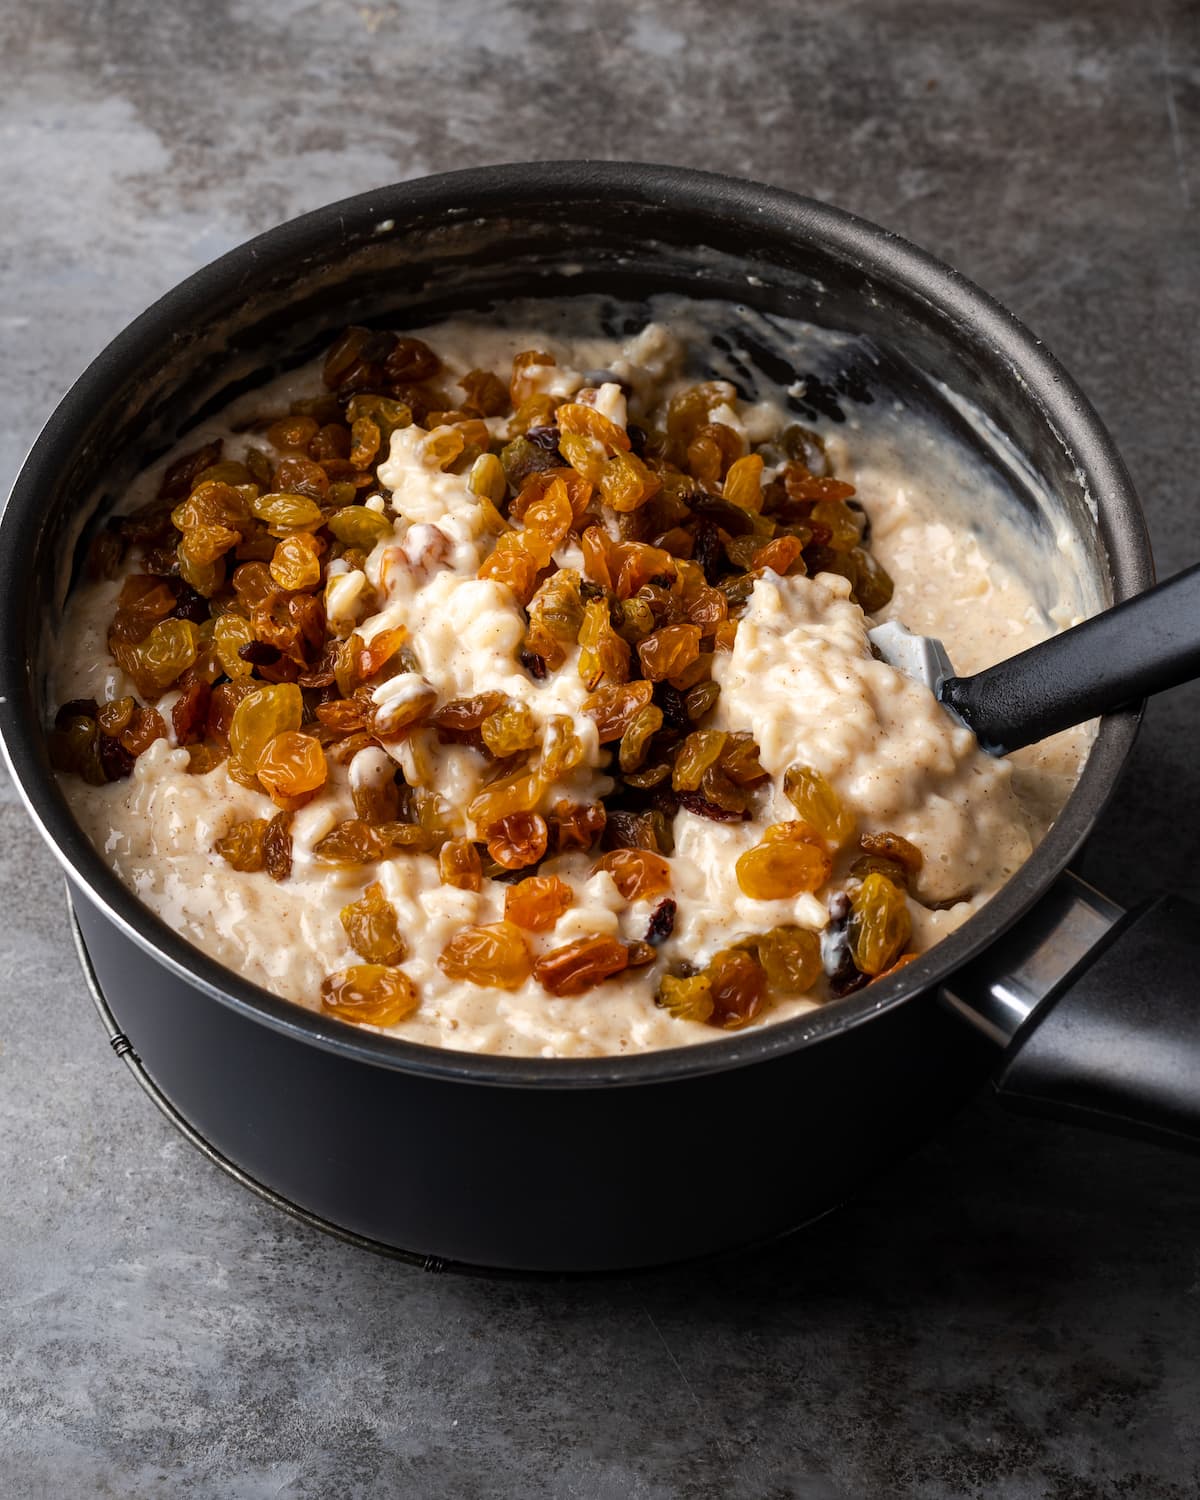 Raisins are stirred into a saucepan filled with rice pudding.